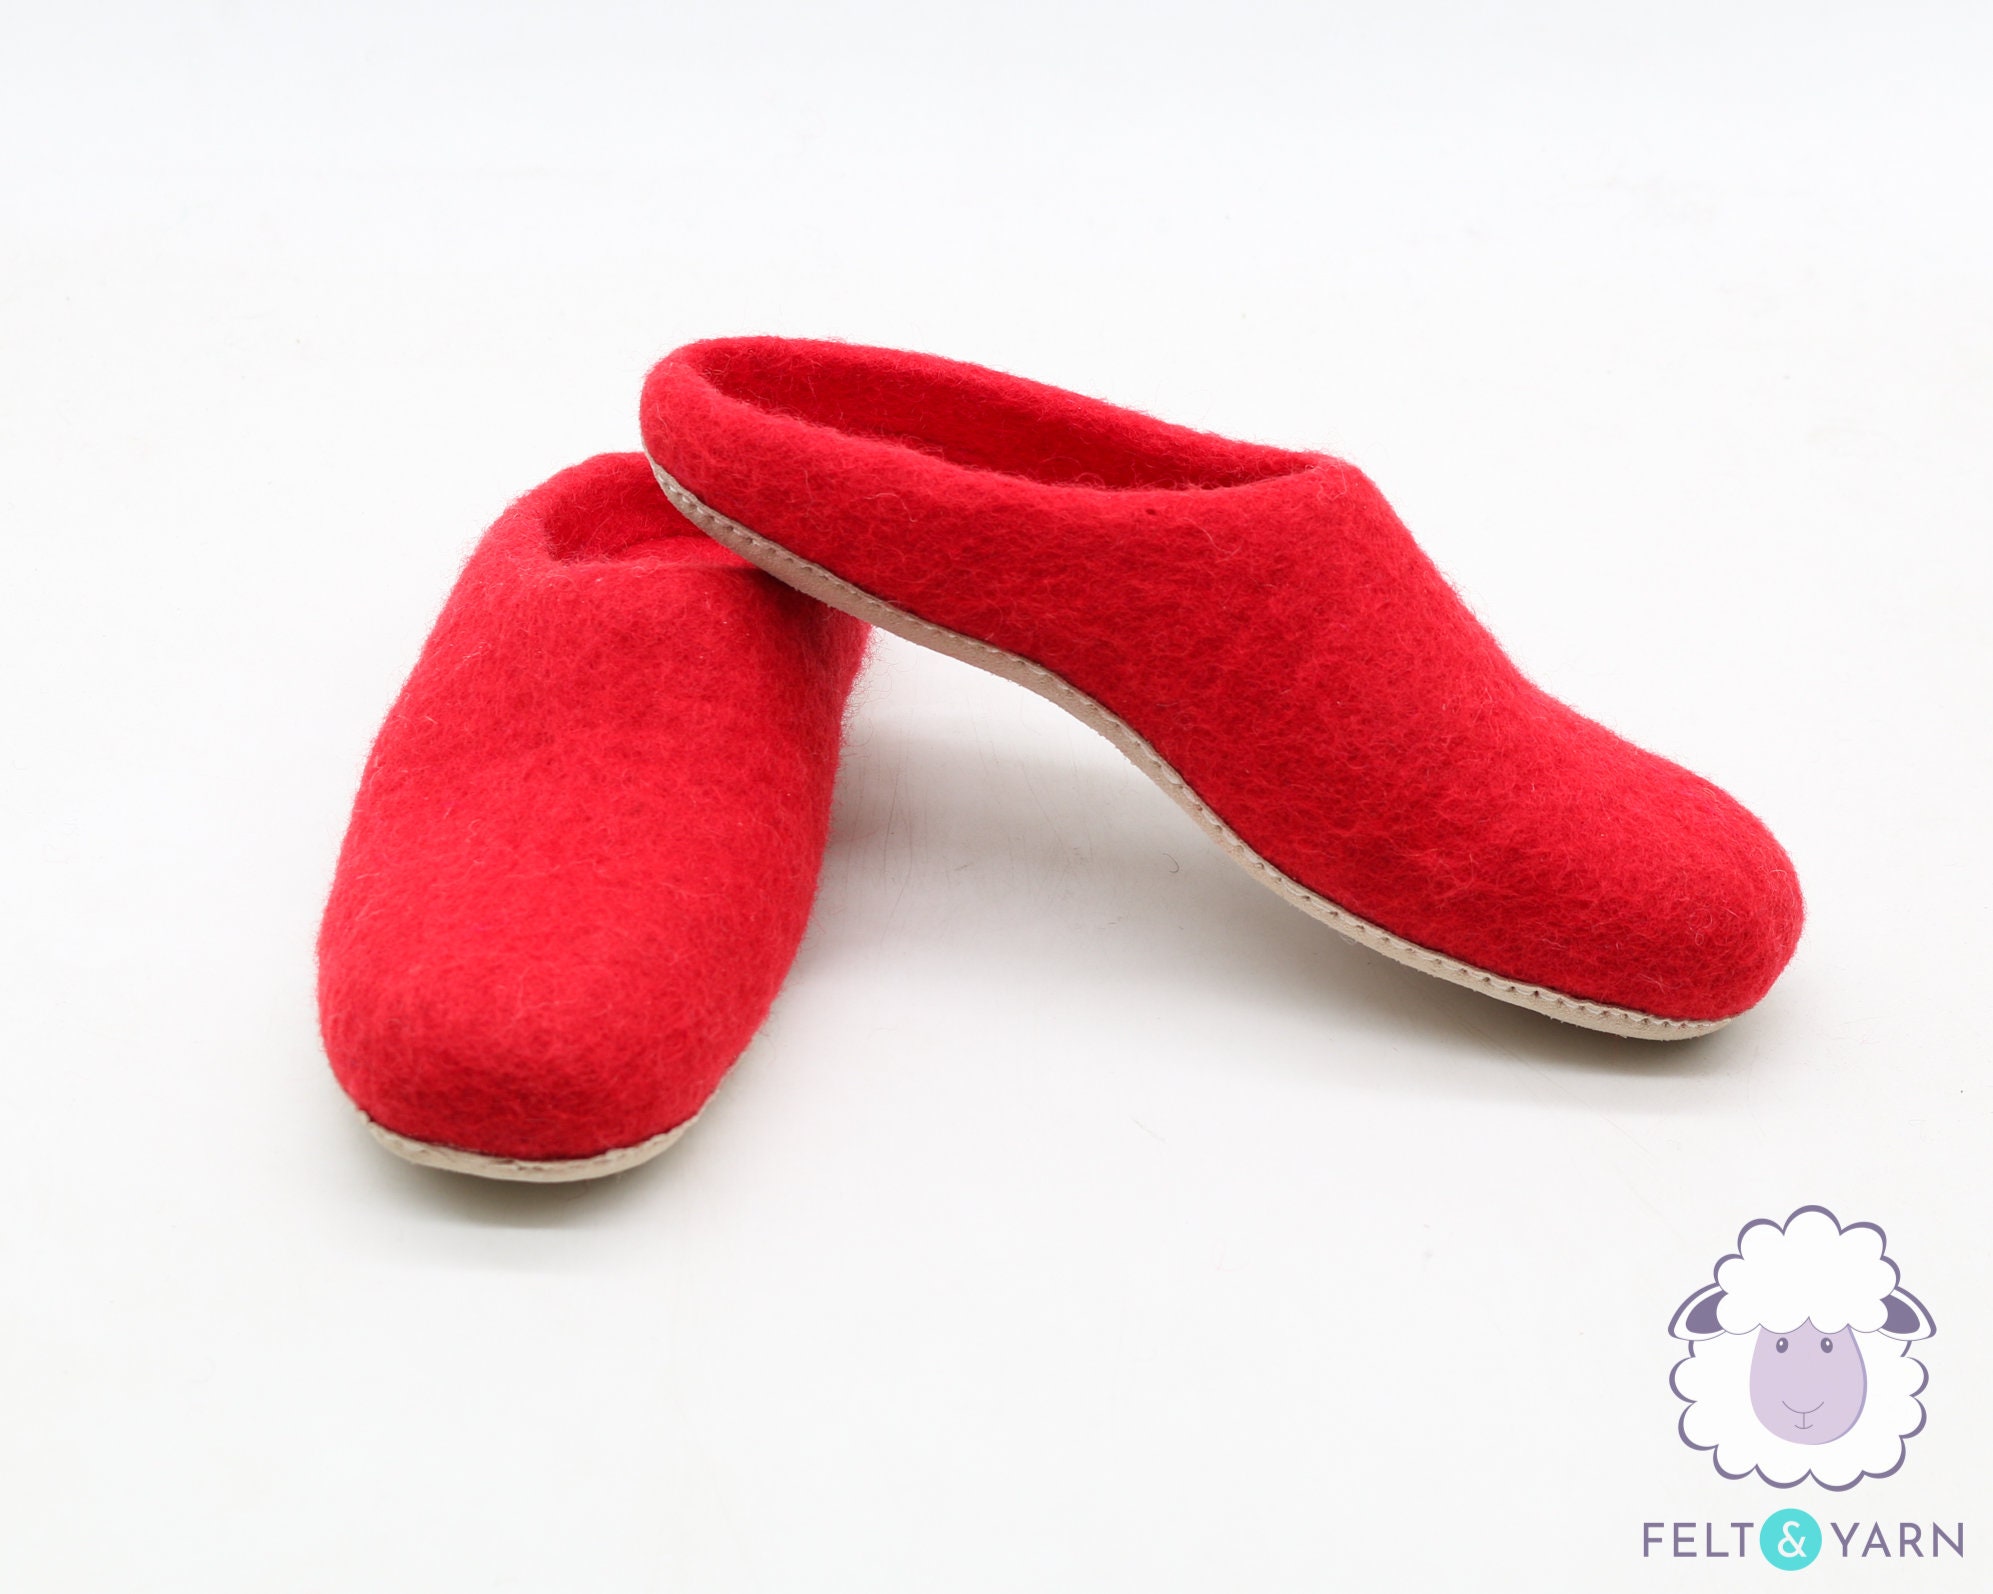 Solid Red Wool Felt Slipper Handmade Felted Unisex Footwear Shoes Made in Nepal Using Natural Pure